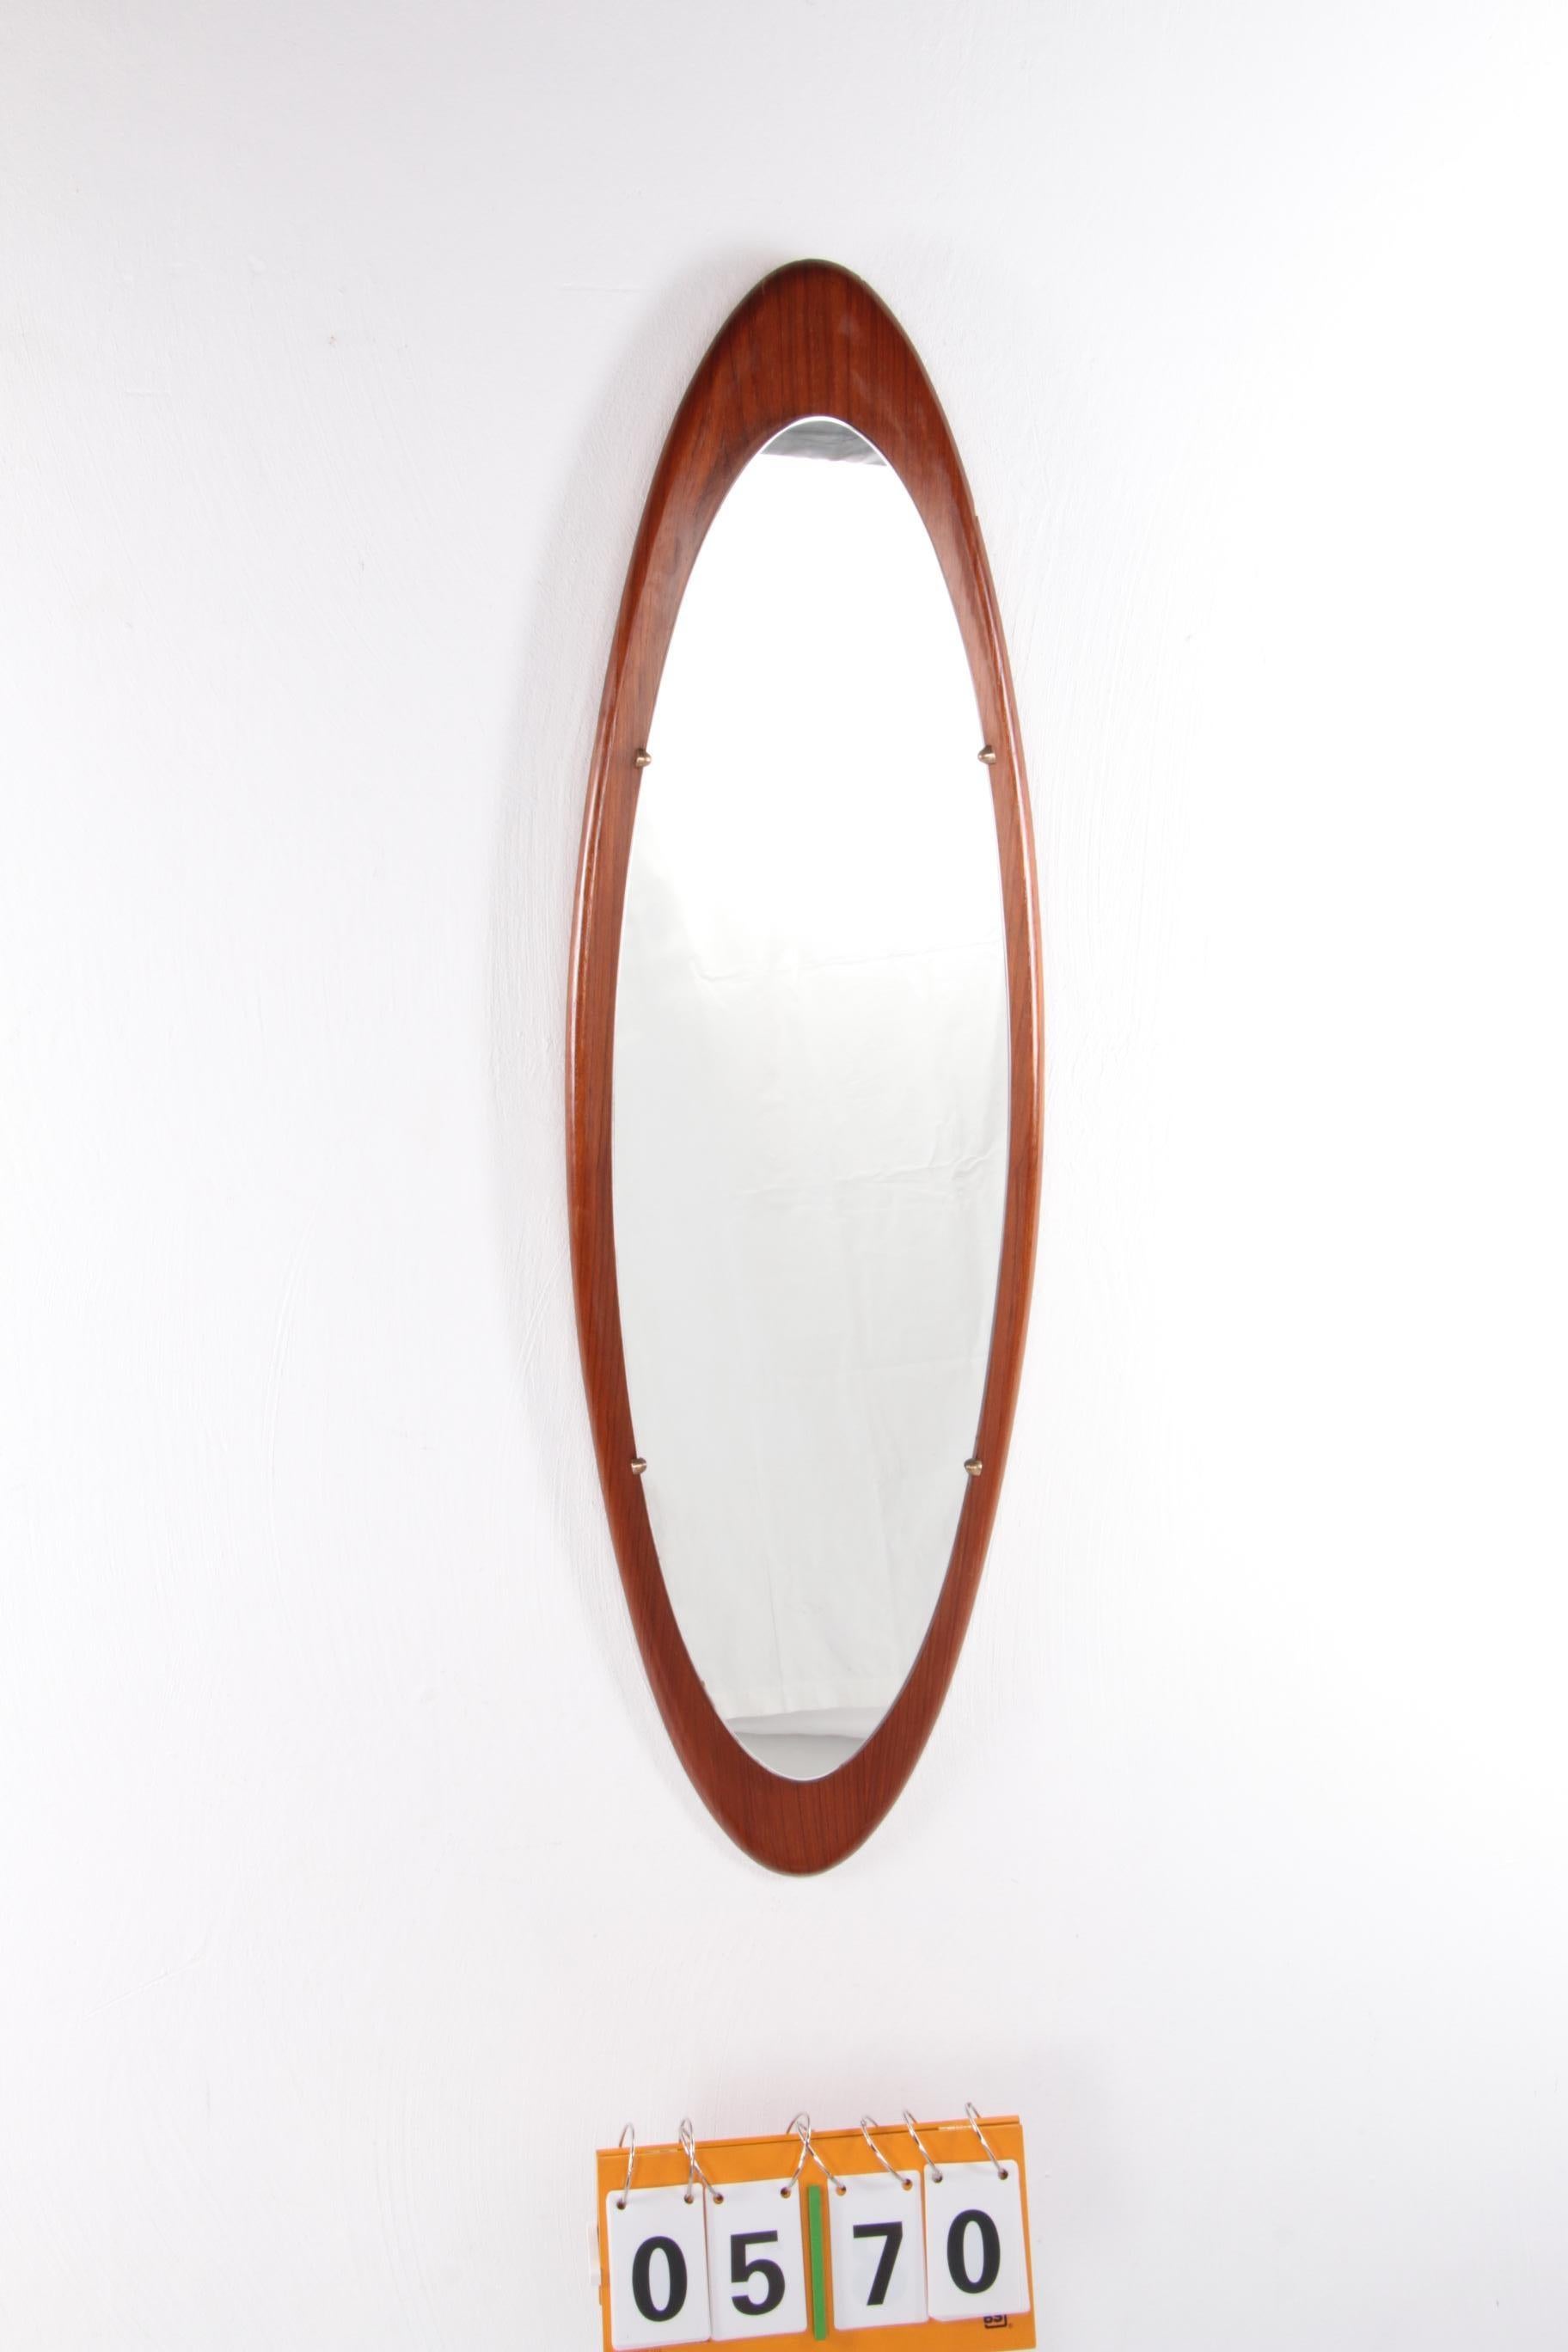 Mid-Century Modern Mid-Century Teak Mirror by Franco Campo & Carlo Graffi for Home, Italy 1960s For Sale